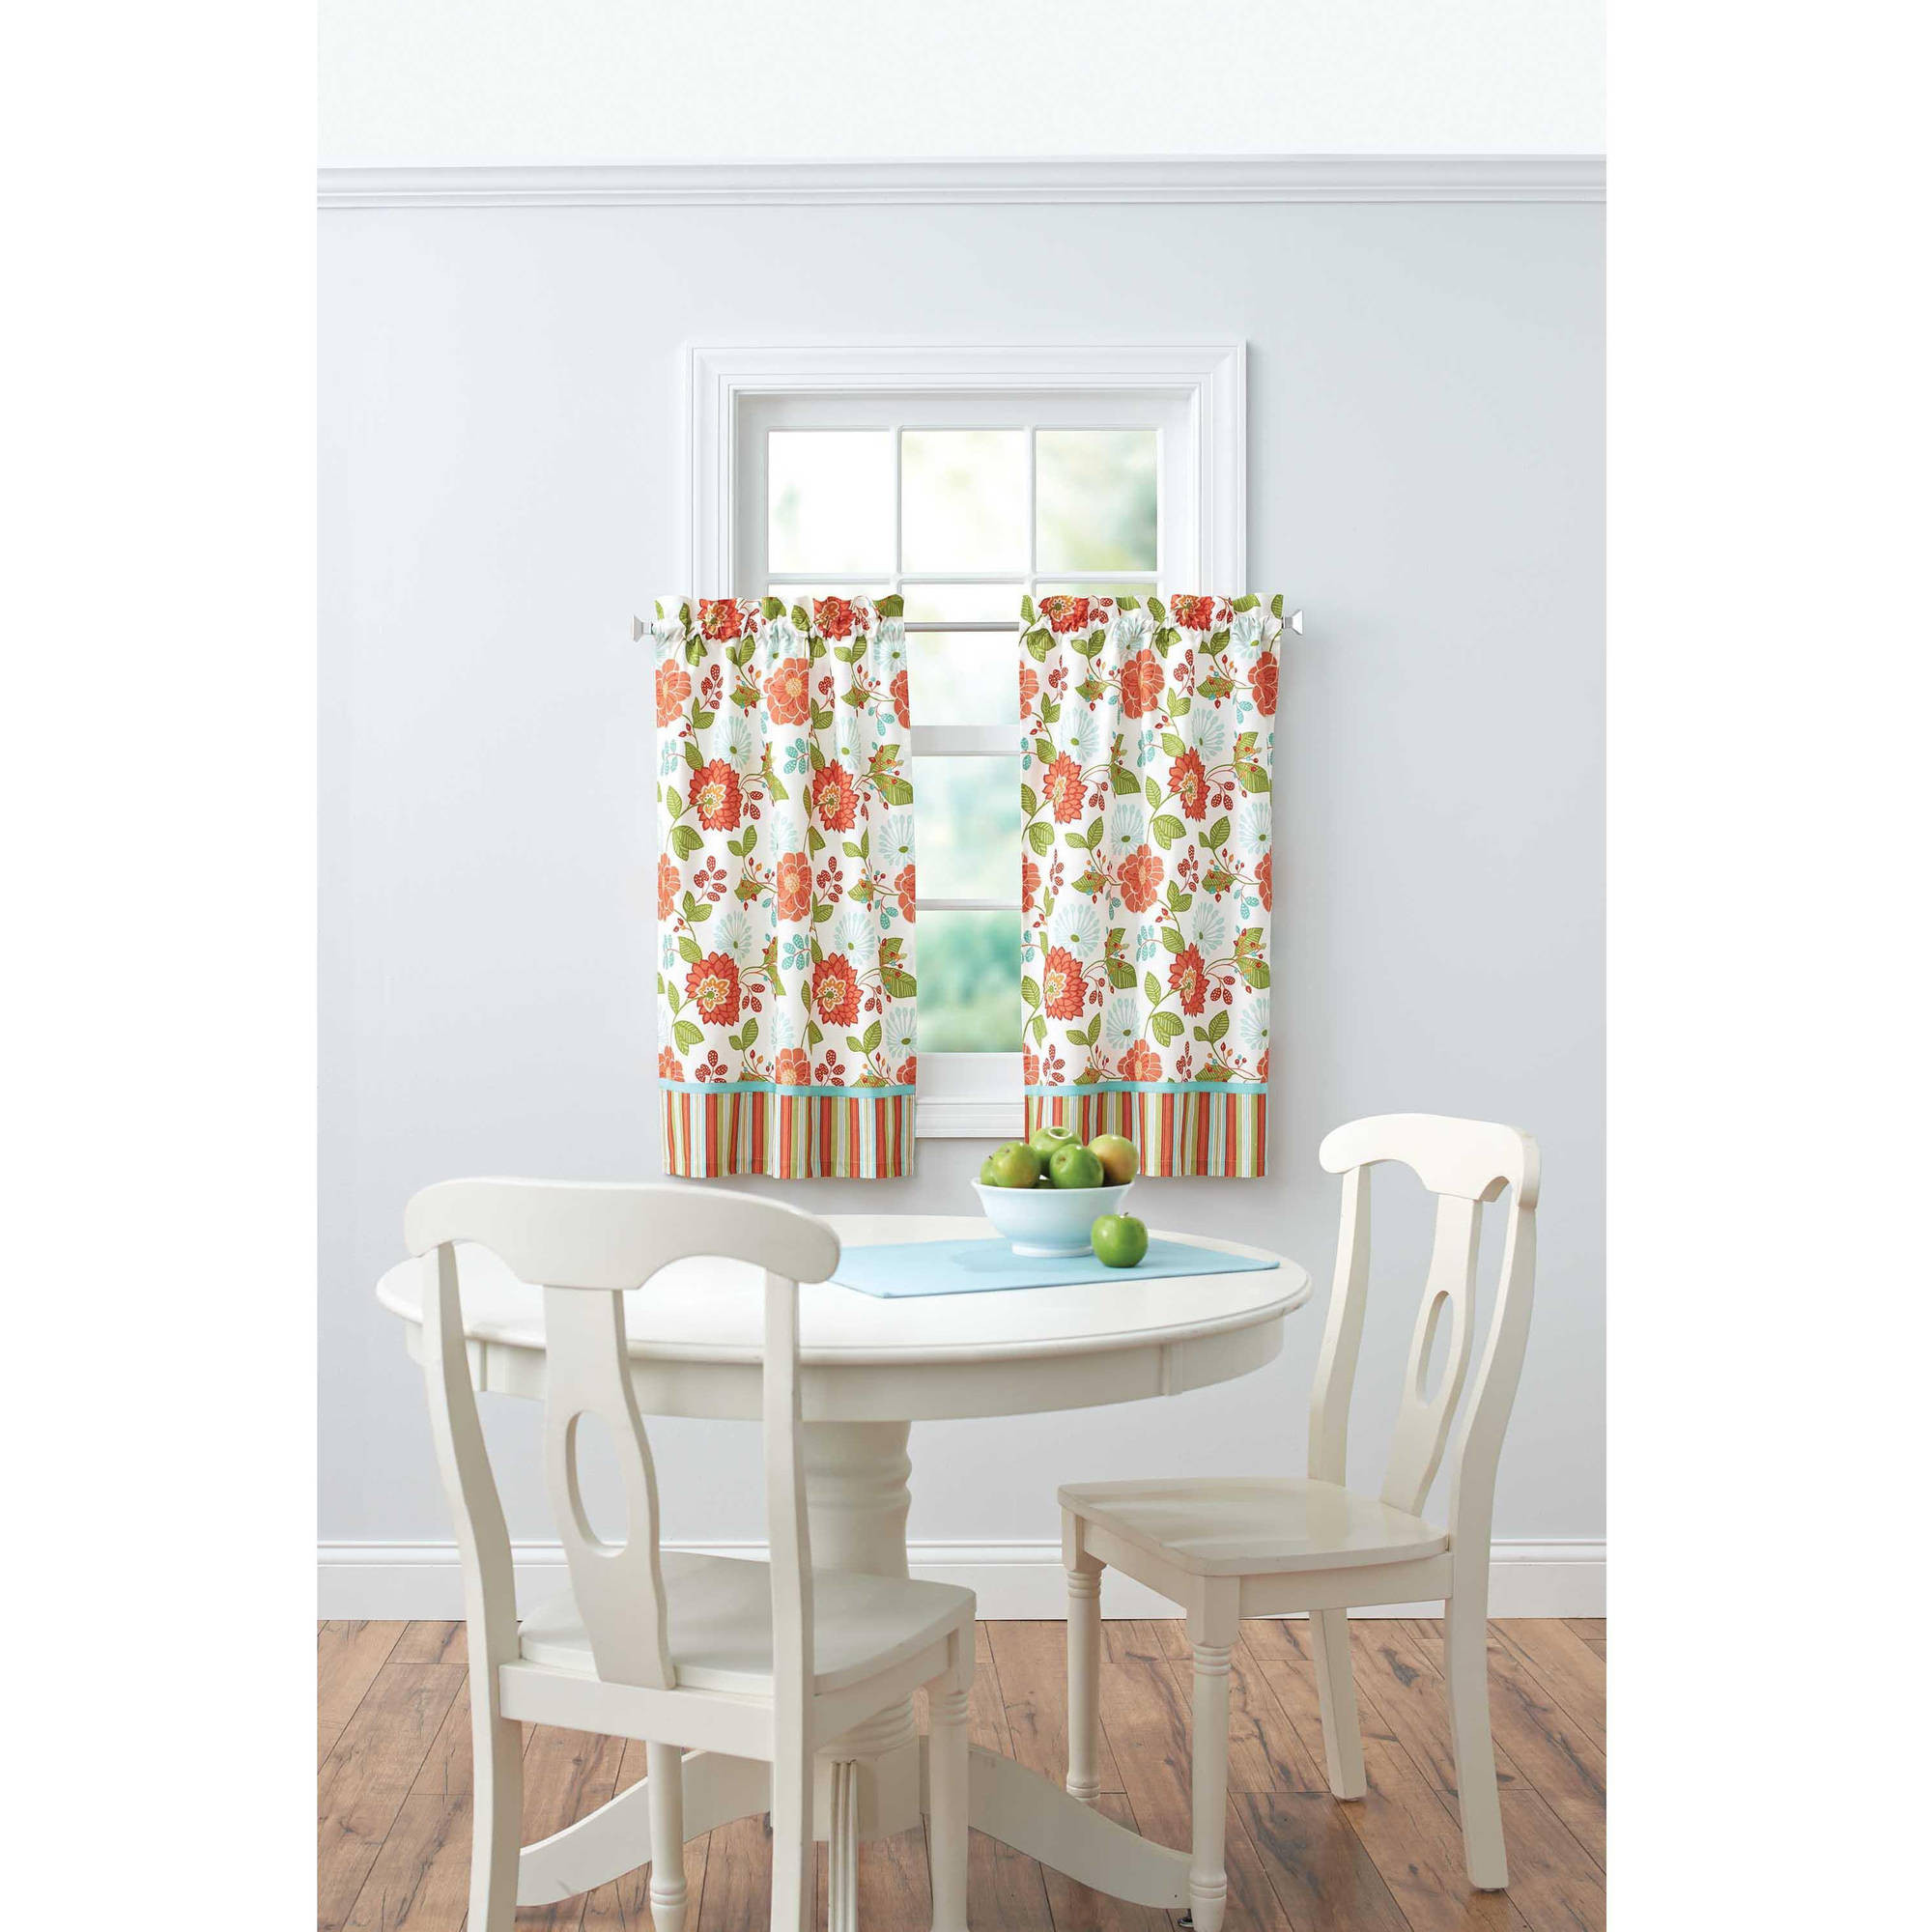 Valance Curtains For Kitchen
 Better Homes and Gardens Jacobean Stripe Kitchen Curtains